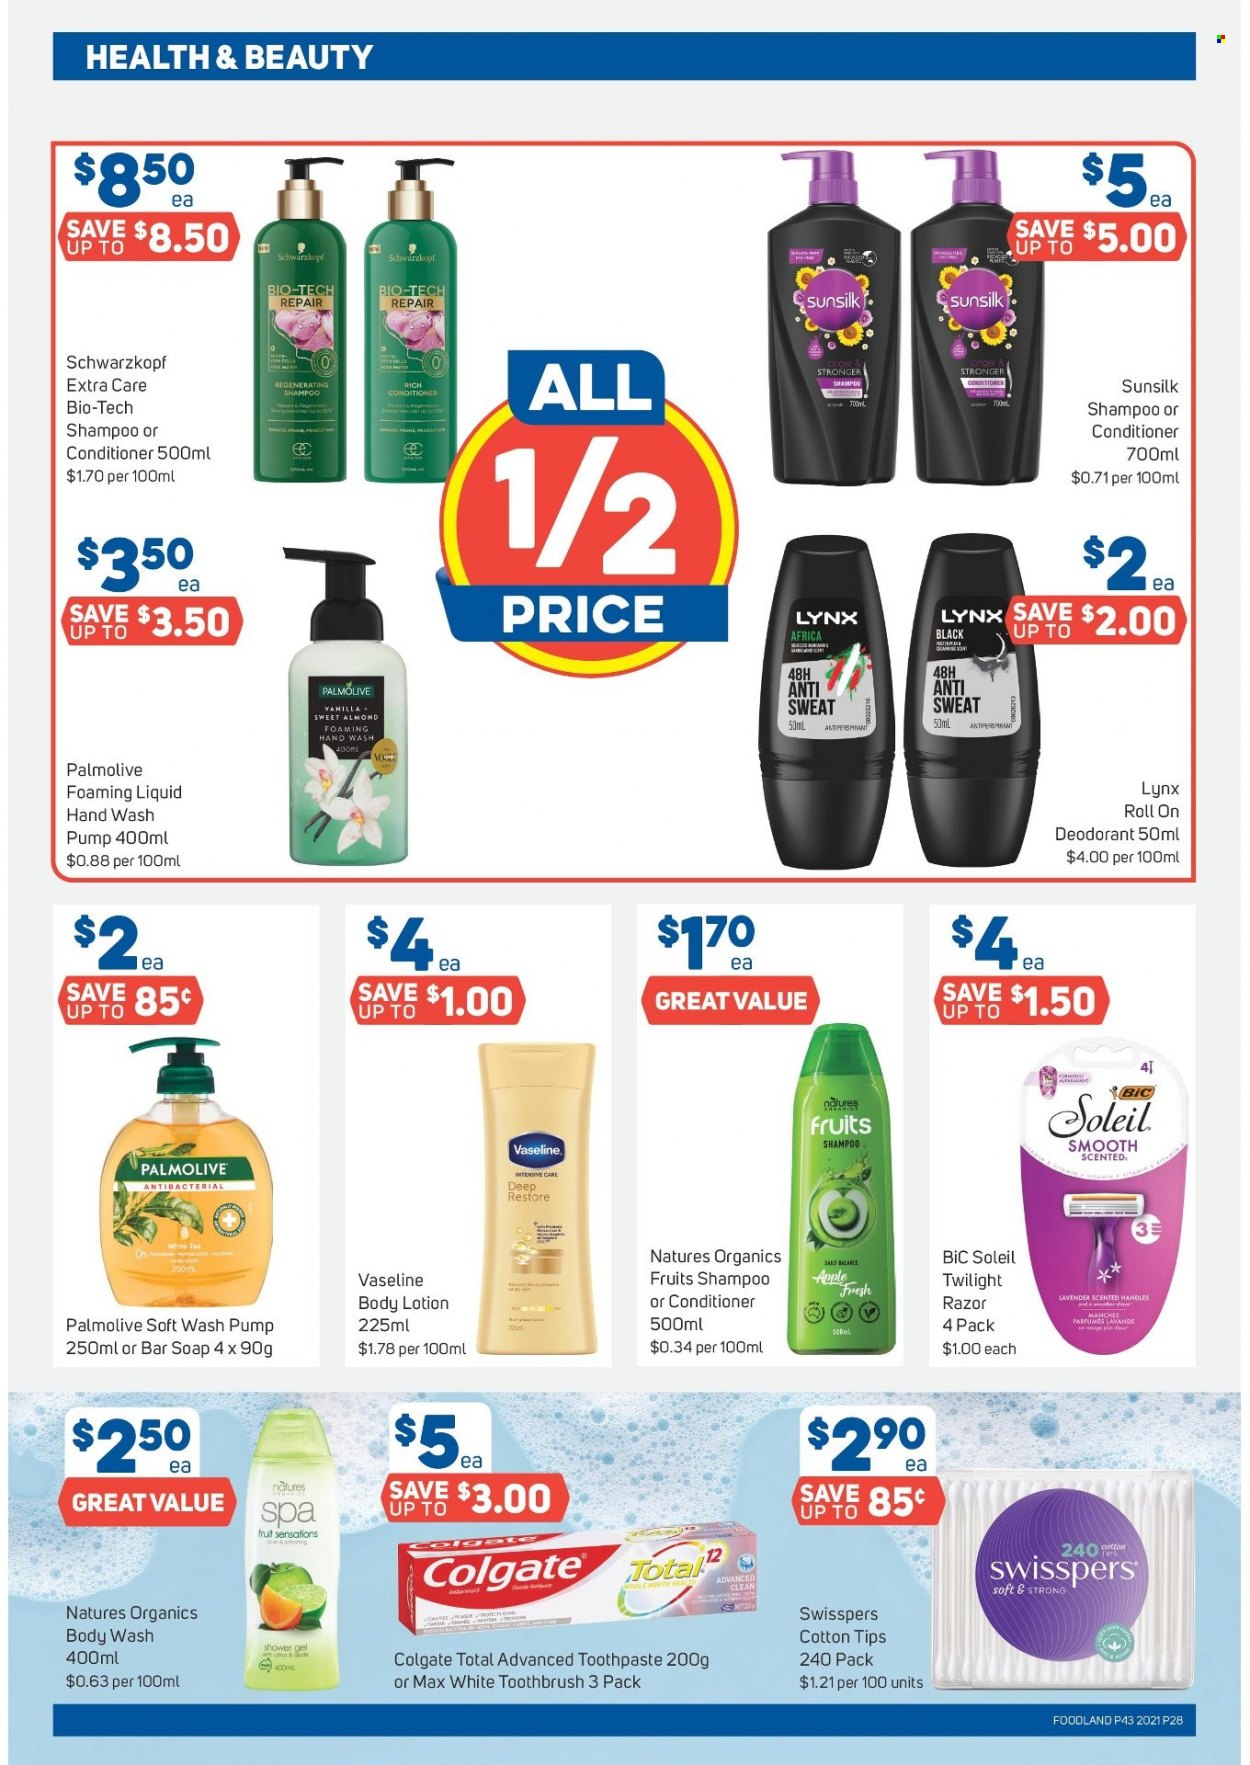 thumbnail - Foodland Catalogue - 20 Oct 2021 - 26 Oct 2021 - Sales products - body wash, shampoo, shower gel, Schwarzkopf, hand wash, Palmolive, Vaseline, soap bar, Sunsilk, soap, Colgate, toothbrush, toothpaste, conditioner, body lotion, anti-perspirant, roll-on, deodorant, BIC, razor. Page 28.